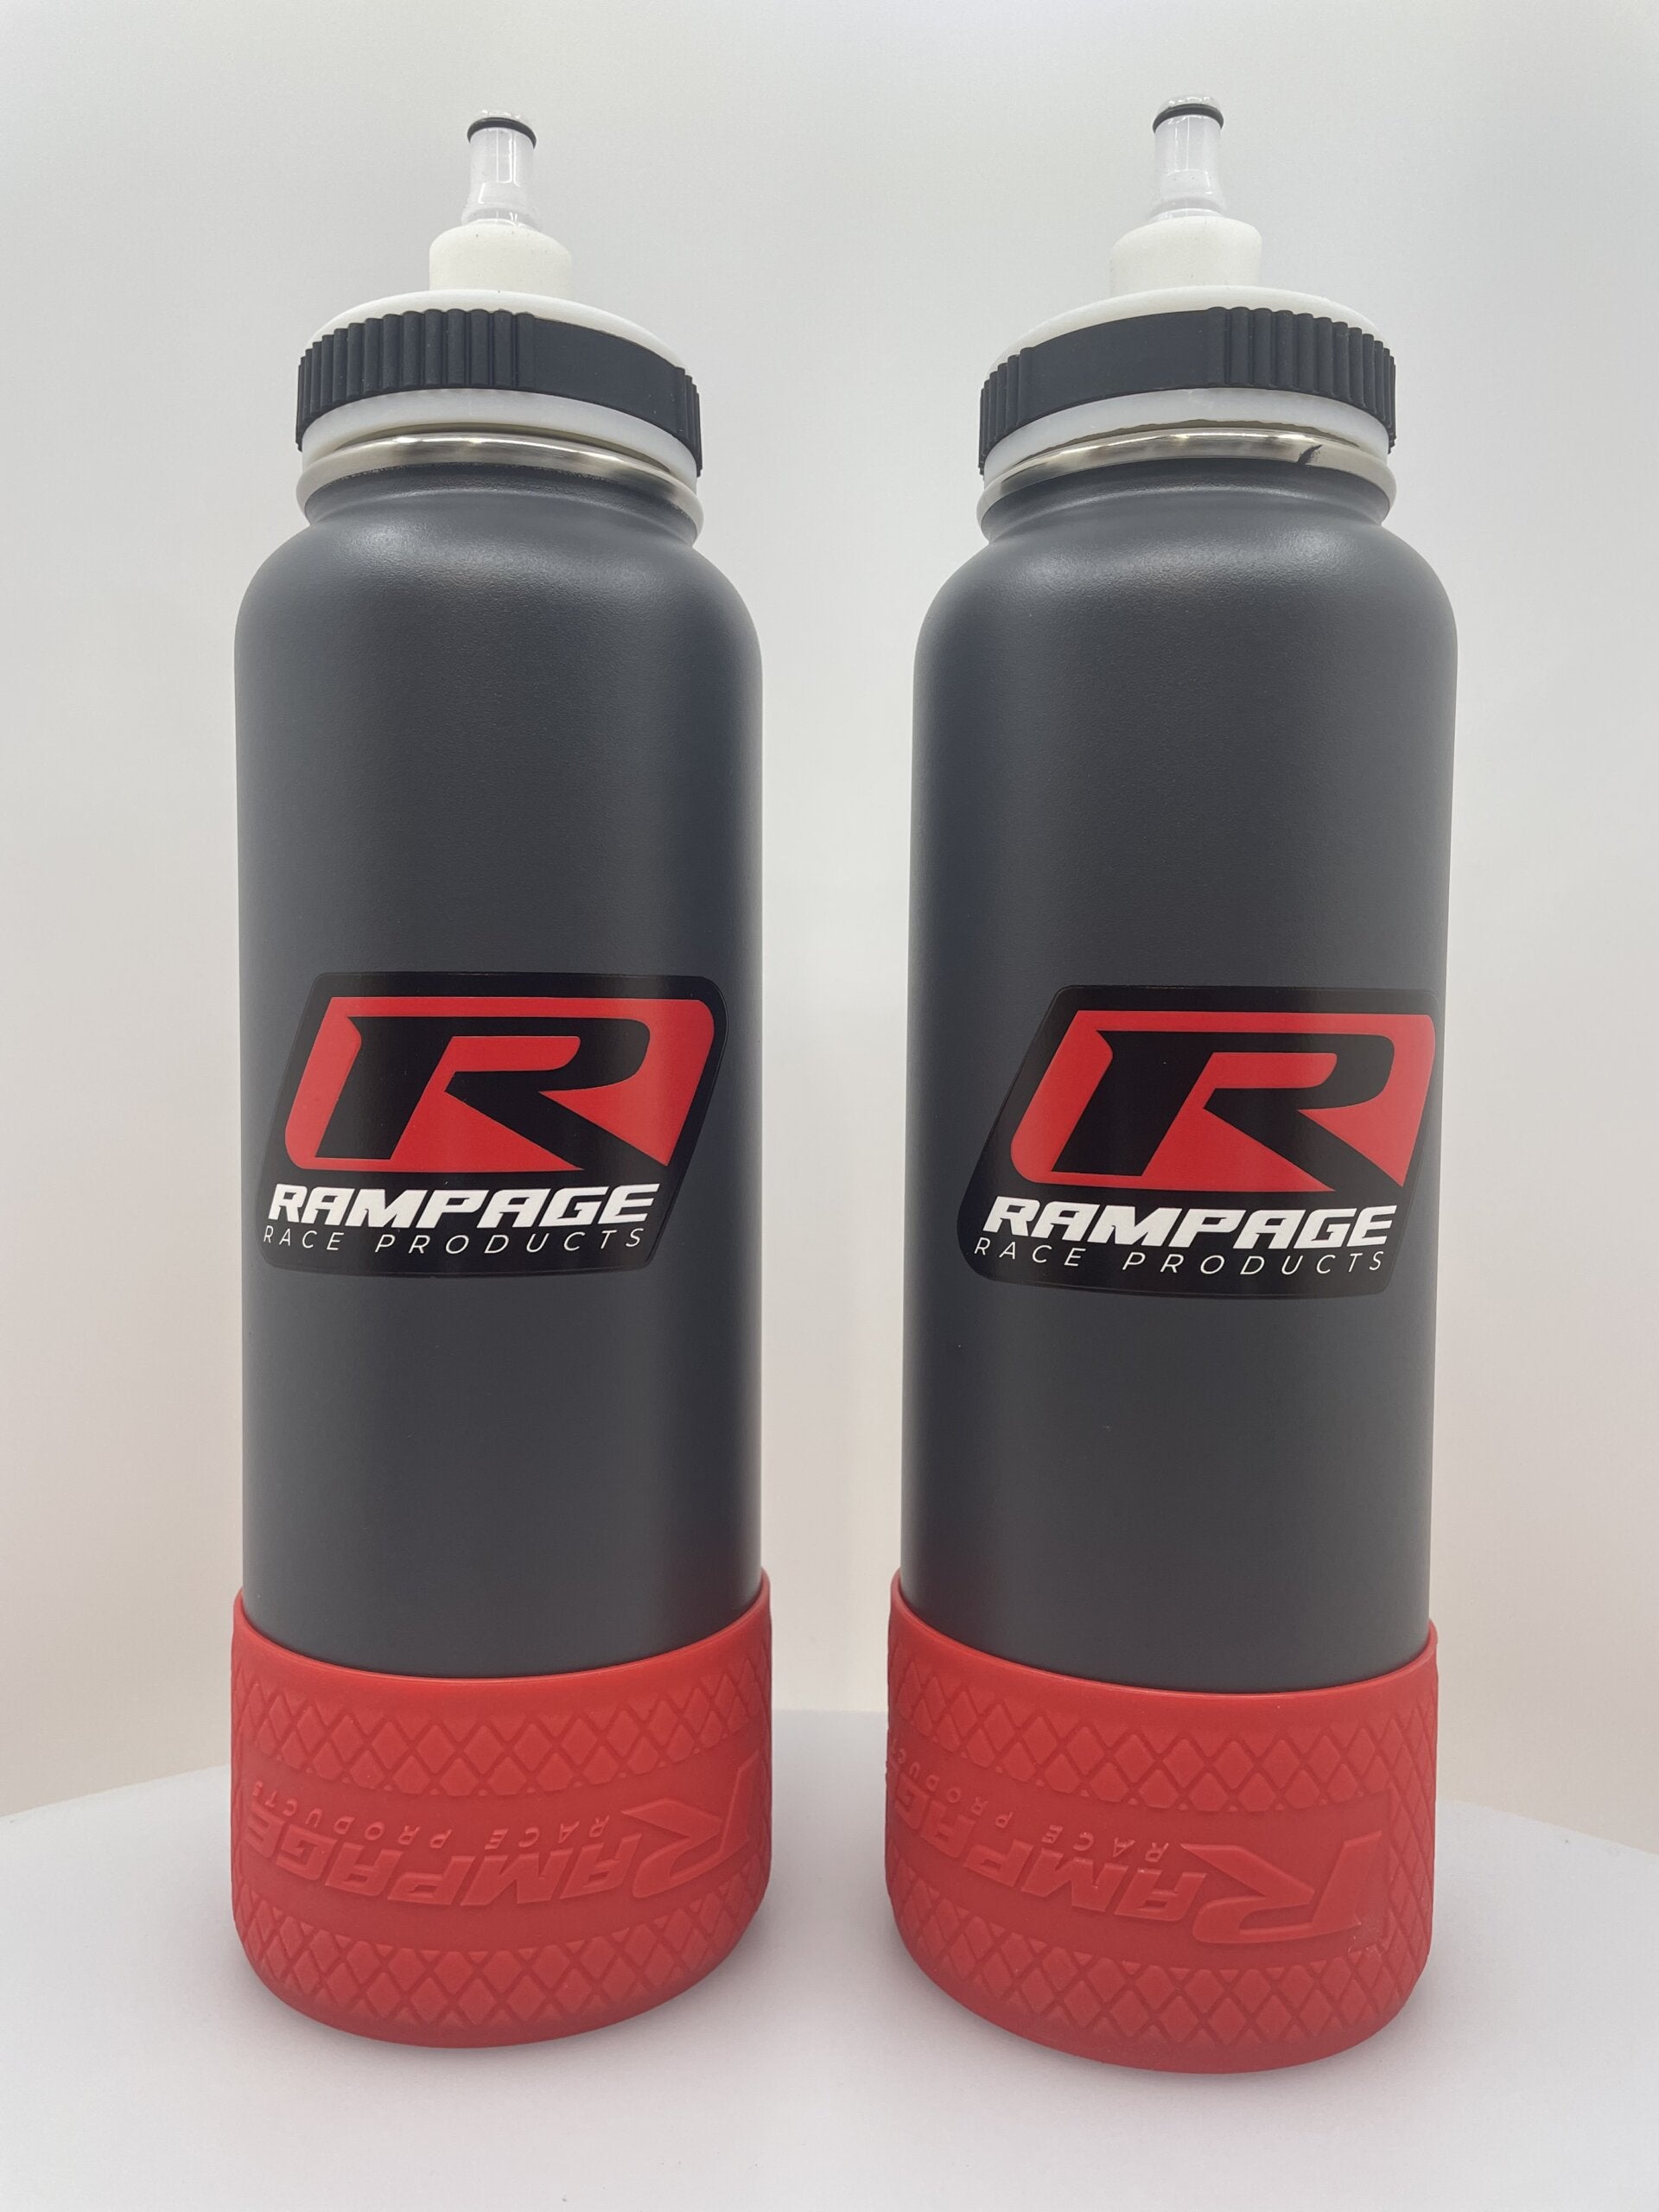 Rampage drink systems Bottles